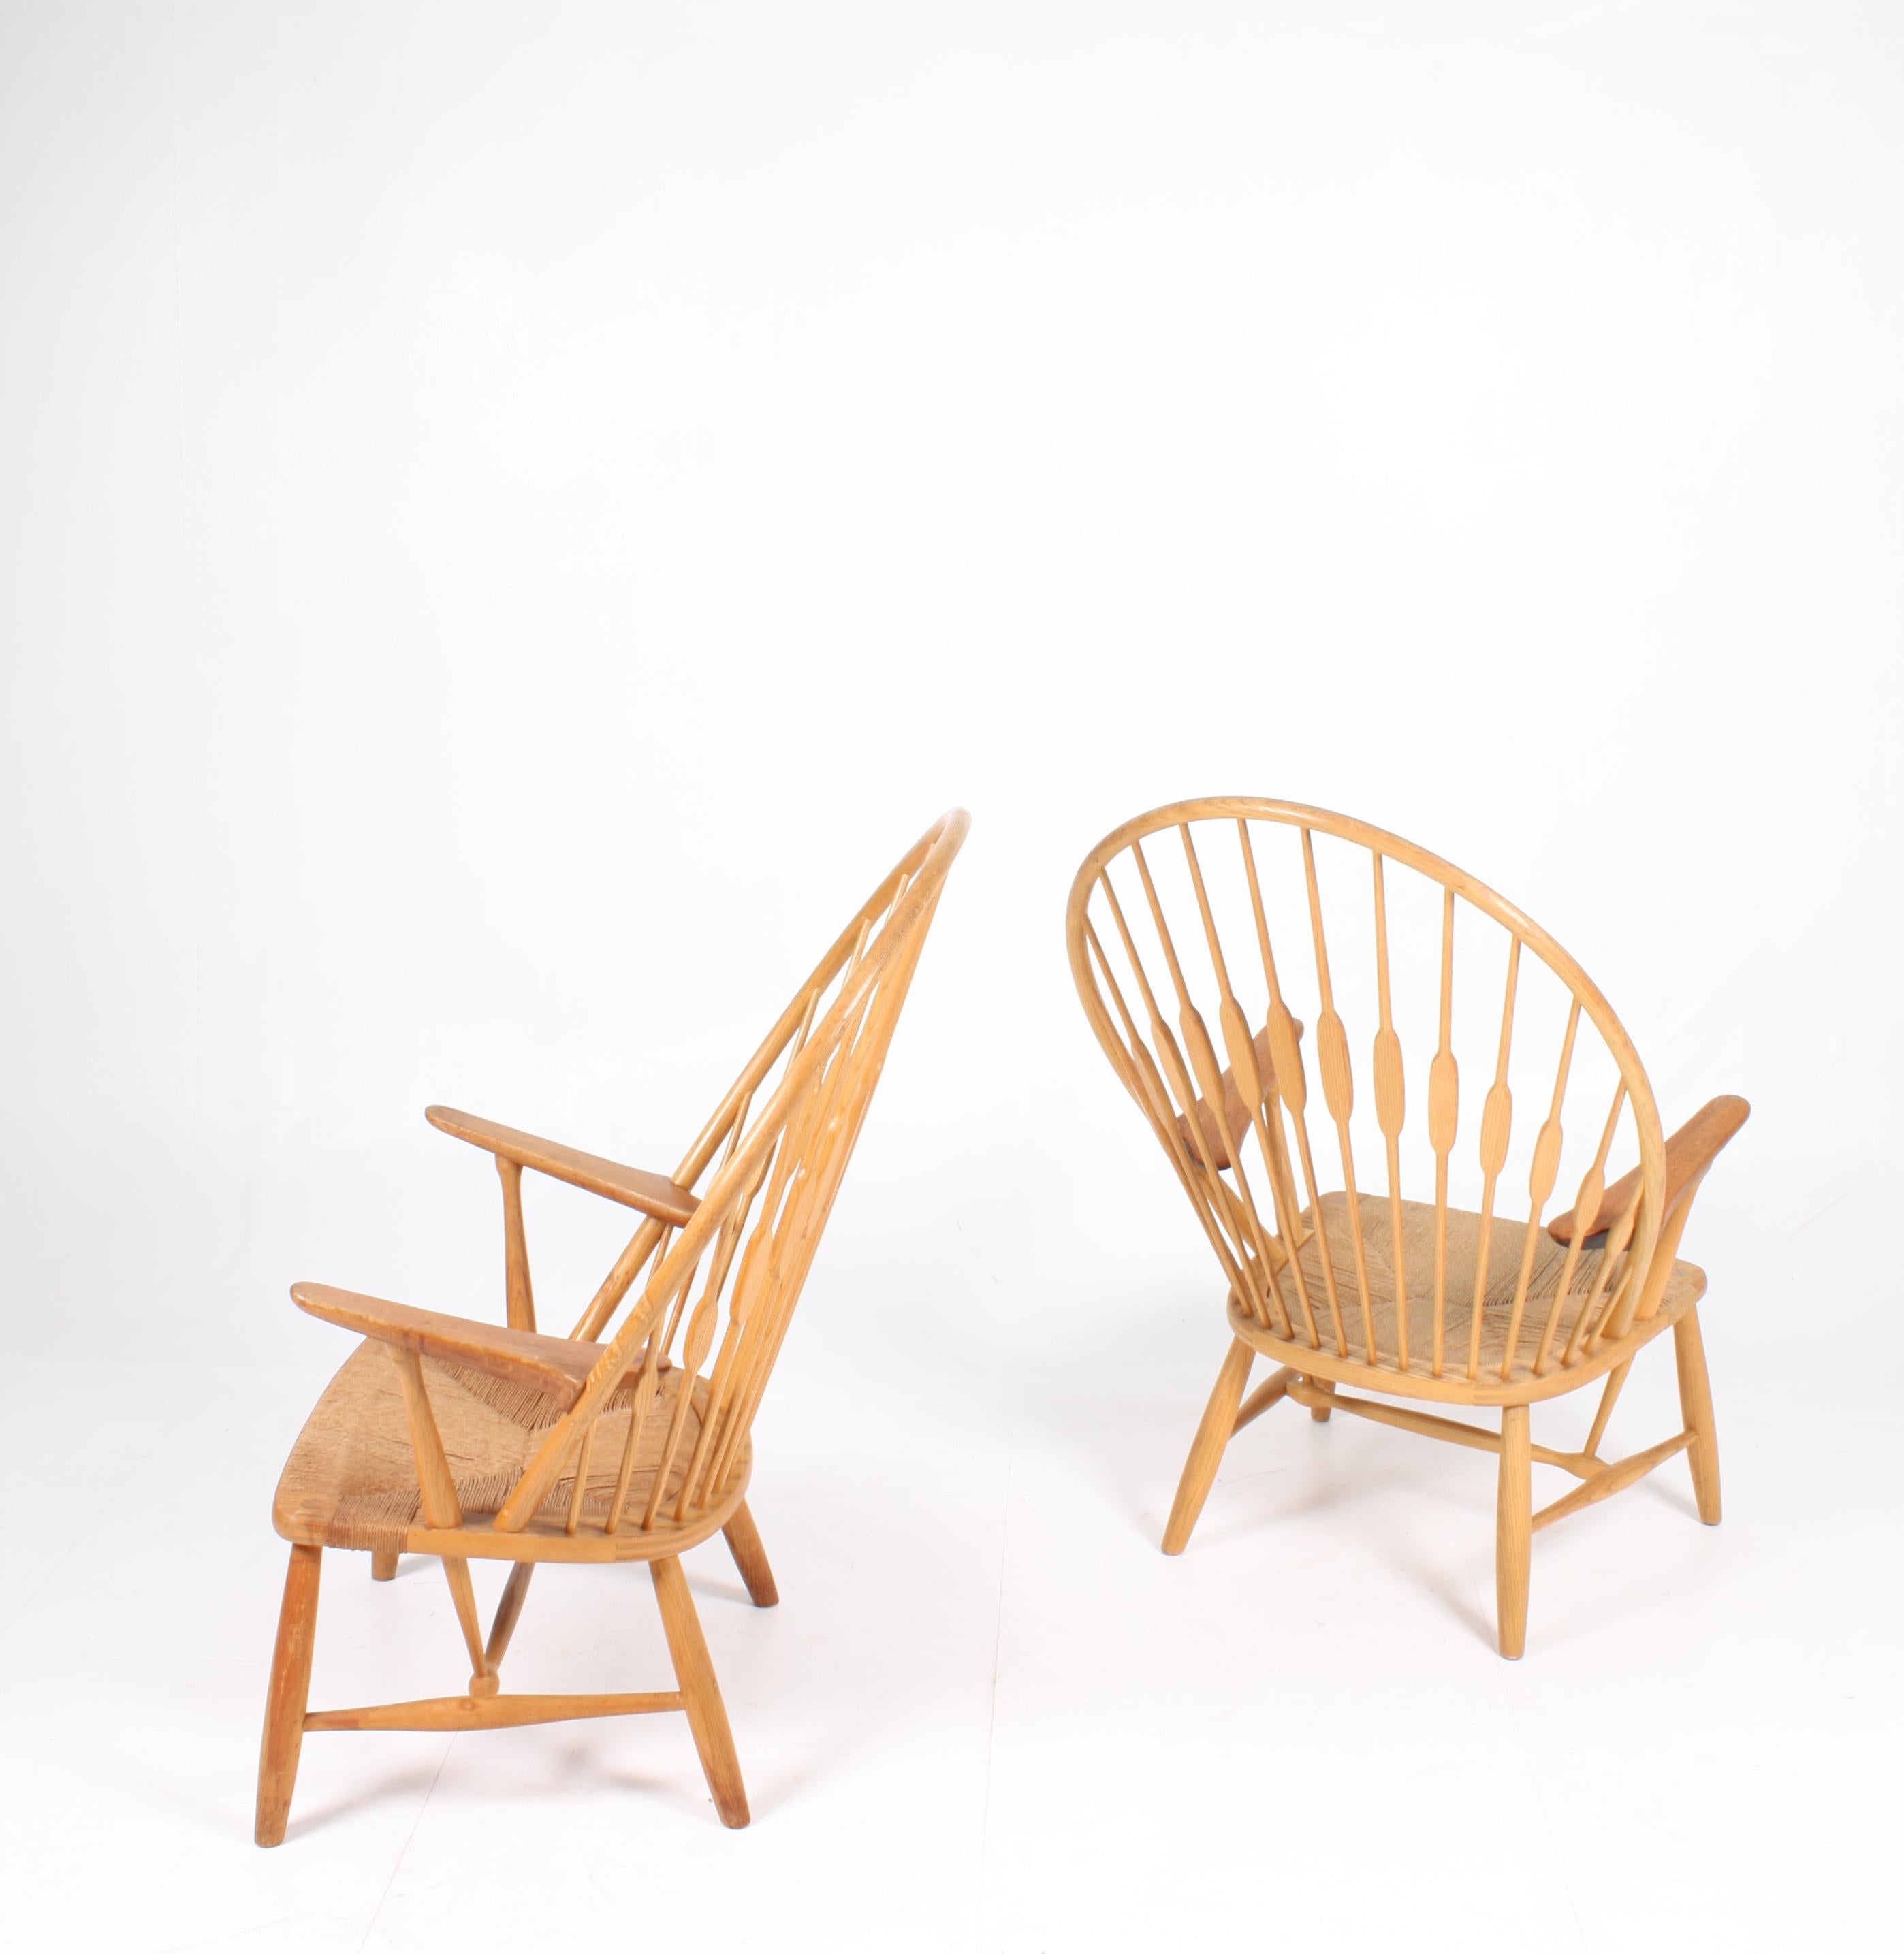 Pair of old peacock chairs by designed by Hans J Wegner for master cabinetmaker Johannes Hansen. The chair shows a very nice patina on both frame and seat. Made in Denmark in the mid 1960s. Great original condition.